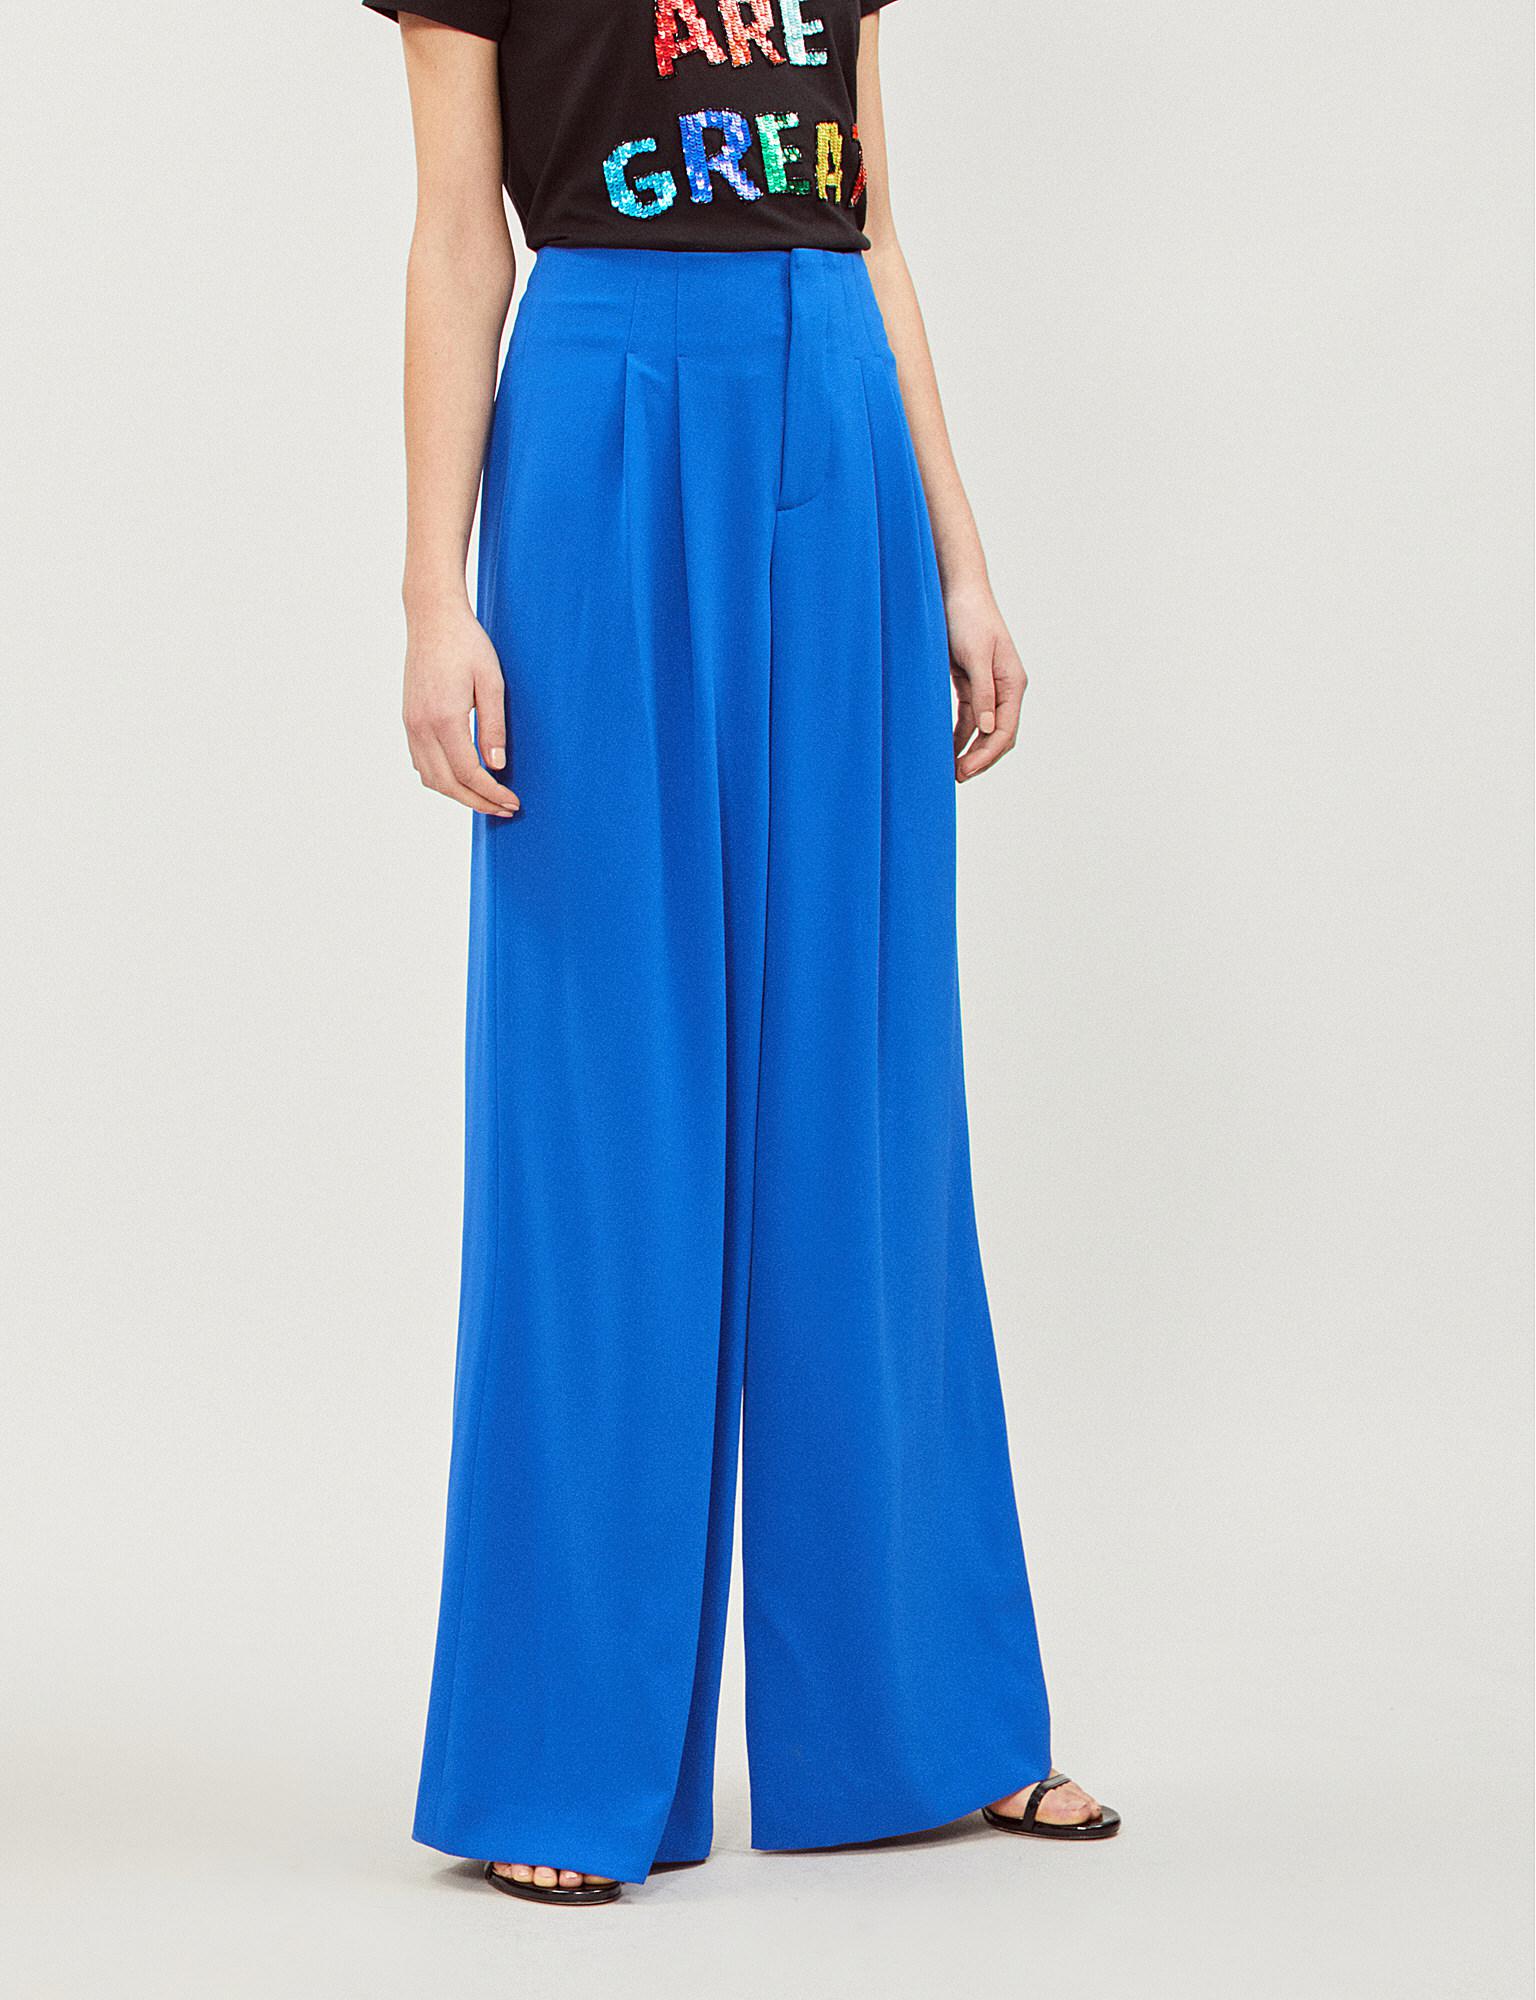 Lyst - Alice + Olivia Eloise High-rise Wide-leg Crepe Trousers in Blue